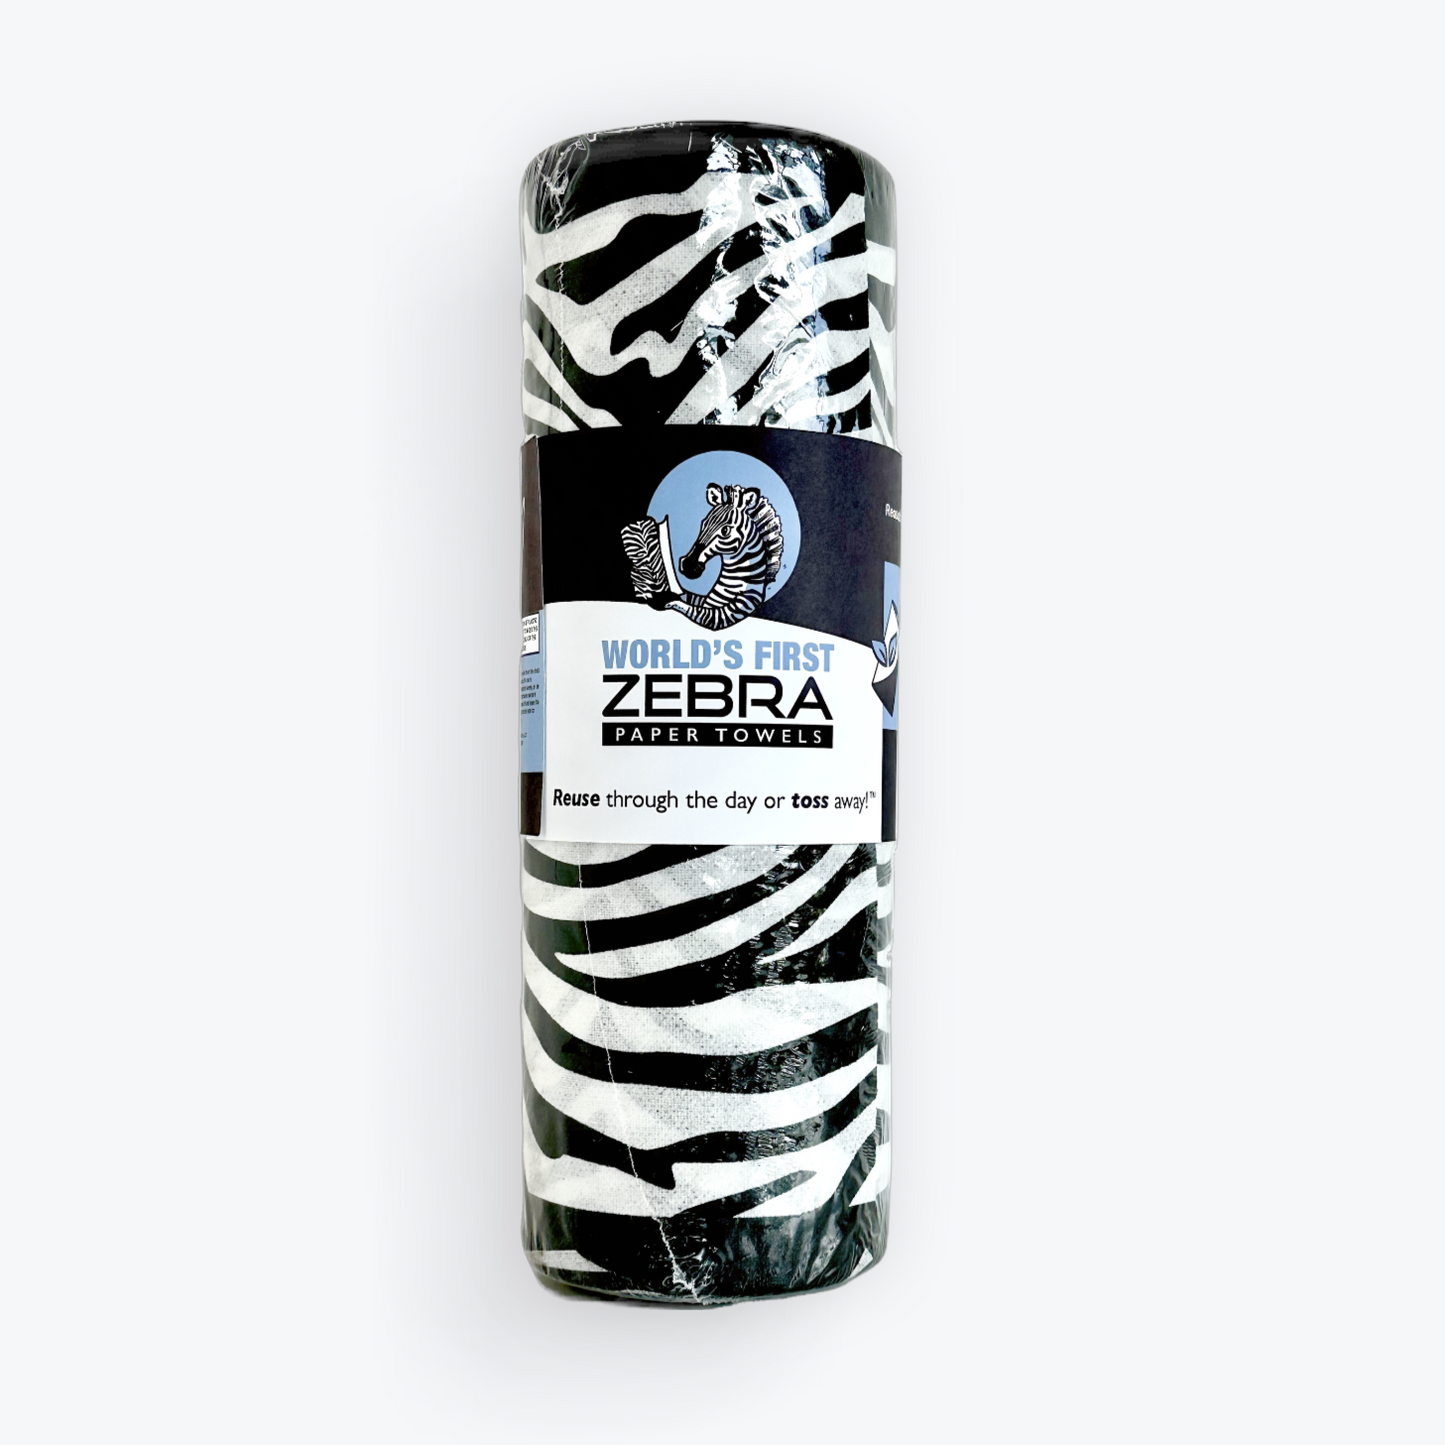 World's First Zebra Paper Towels - 100 Sheets - Reusable Black + White Paper Towels- Single Roll